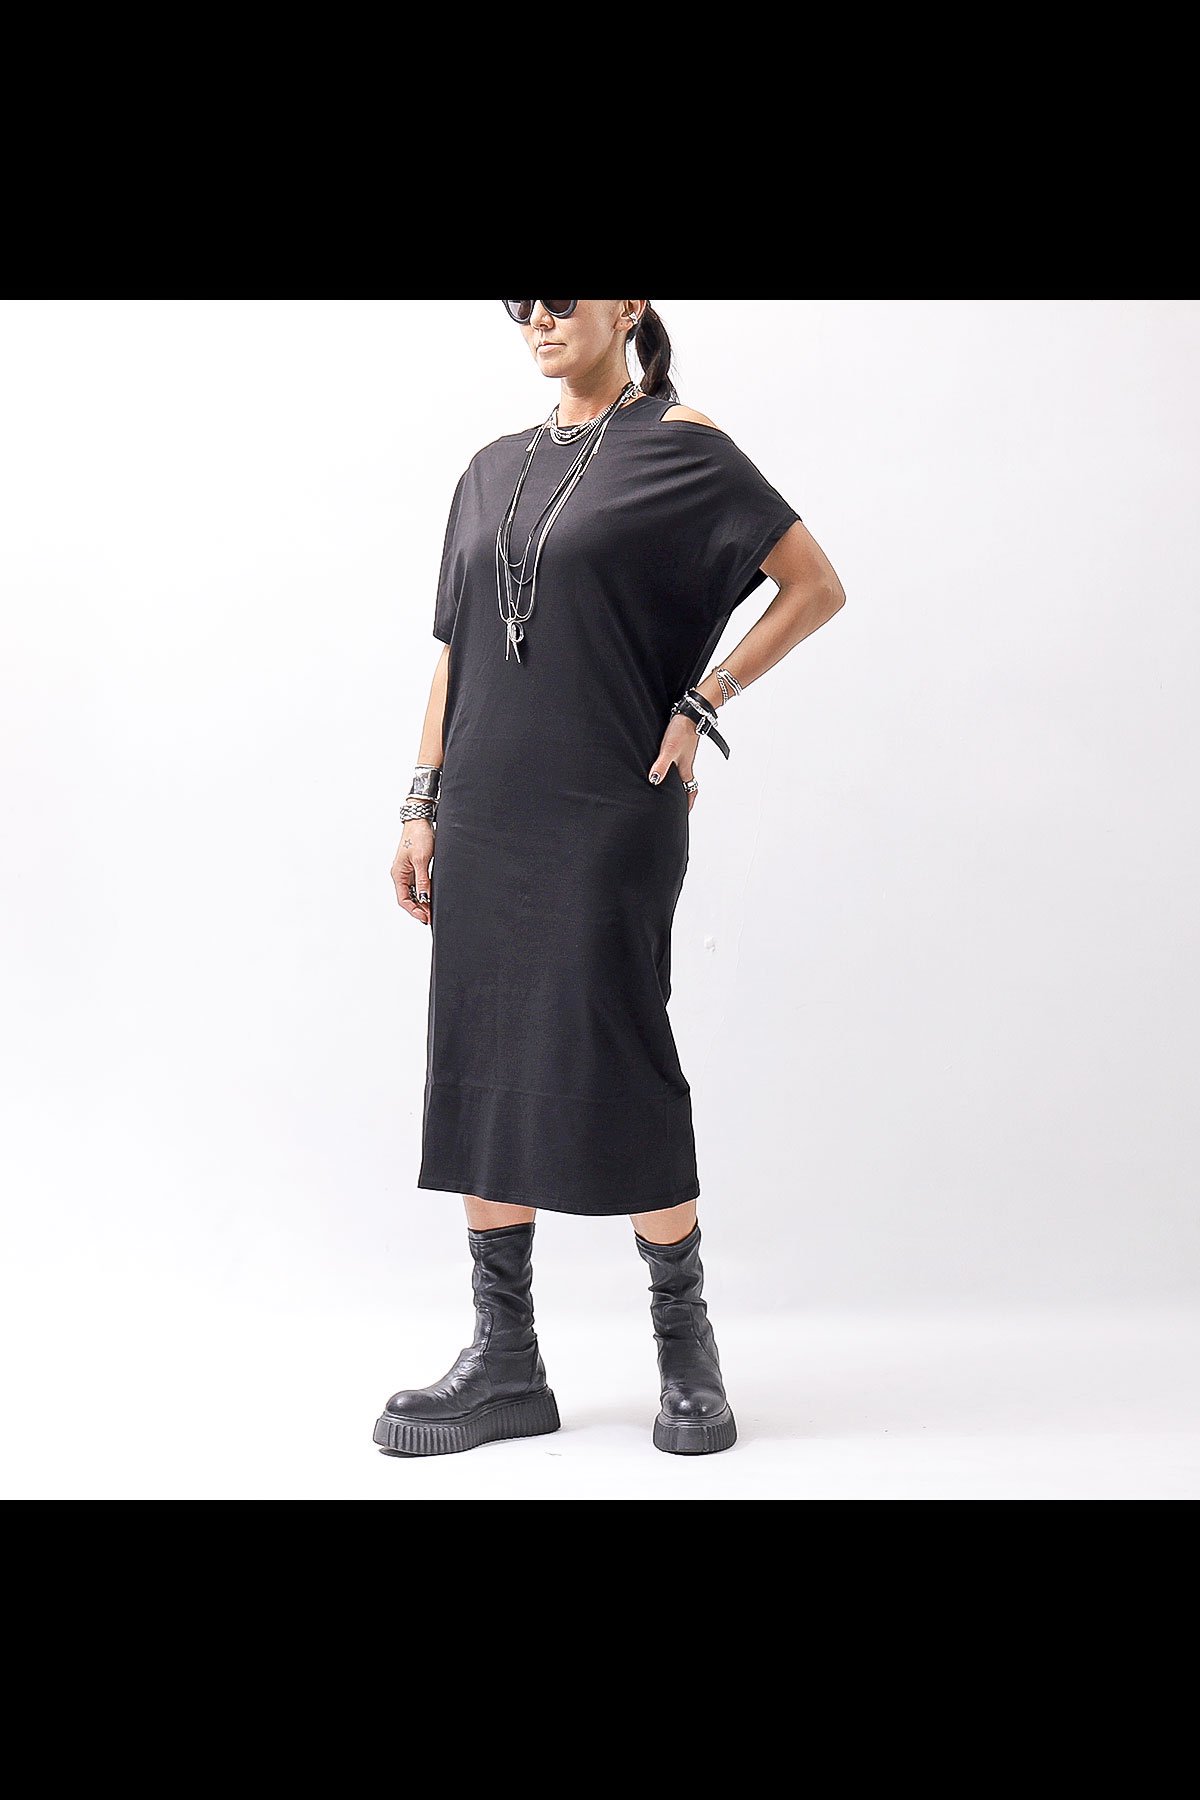 <img class='new_mark_img1' src='https://img.shop-pro.jp/img/new/icons8.gif' style='border:none;display:inline;margin:0px;padding:0px;width:auto;' />STRETCH COTTON 2WAY TOP DRESS A08_BLACK